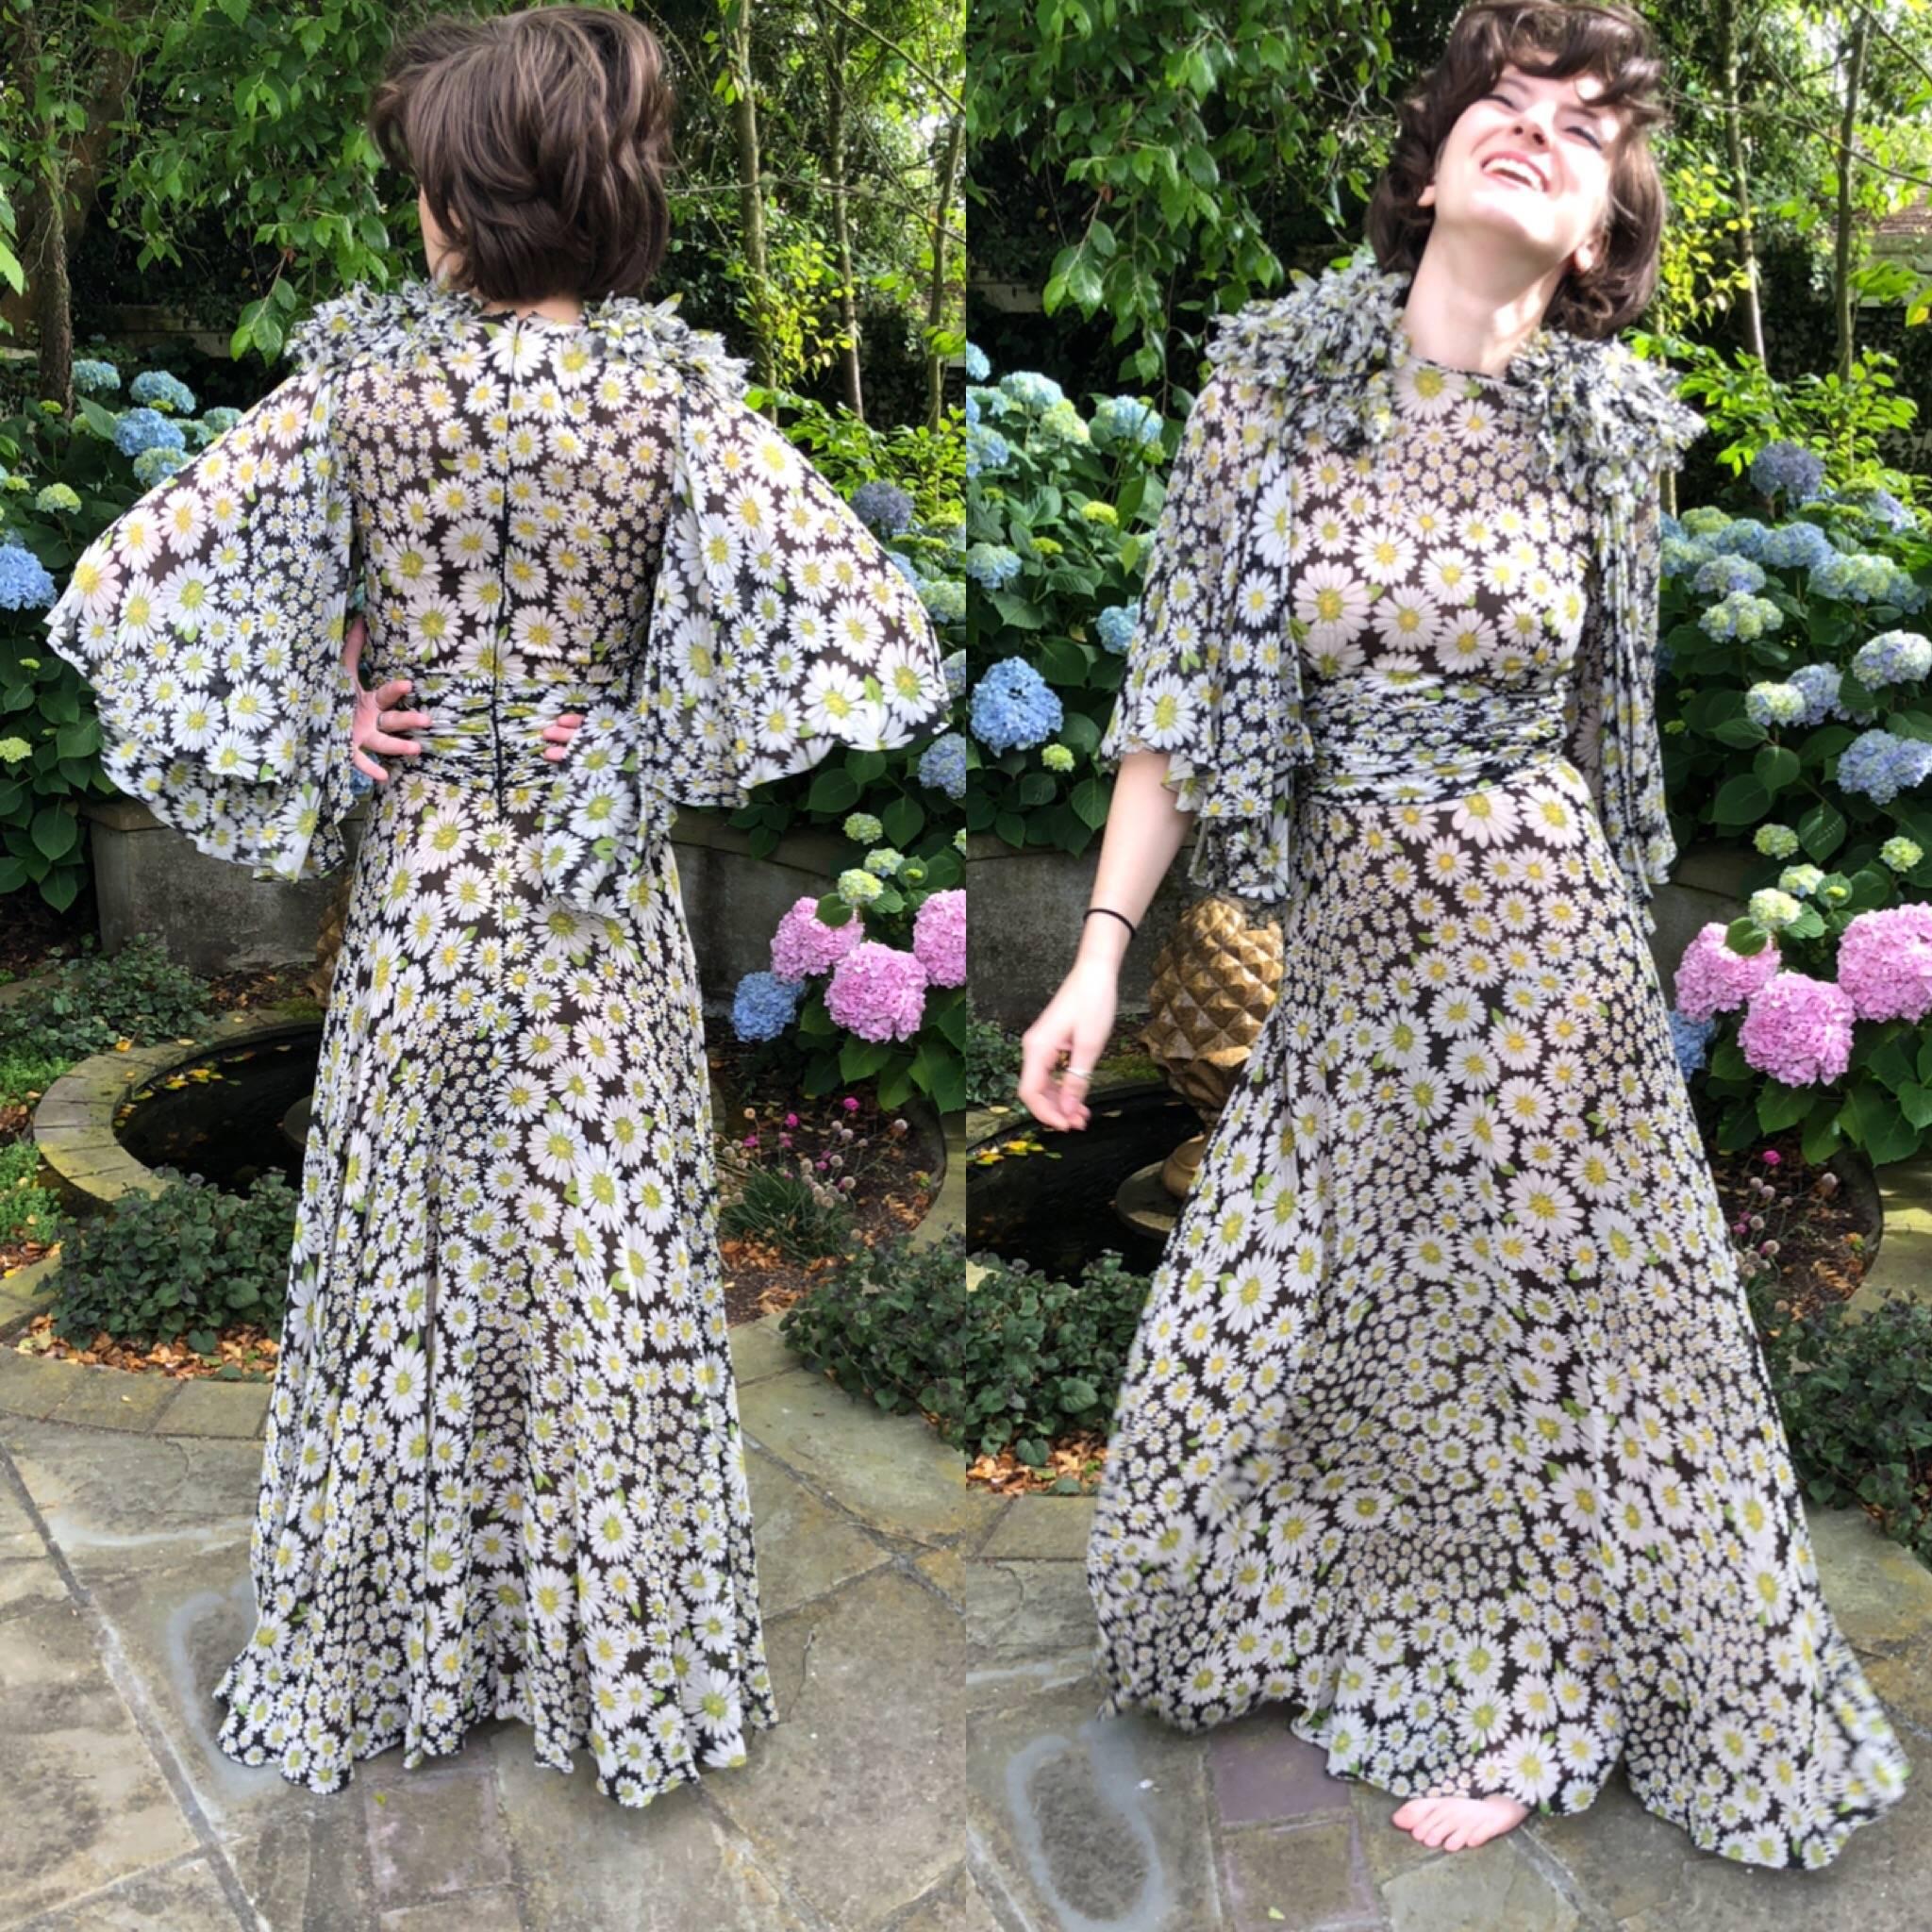 Cardinali Daisy Print Silk Chiffon Bell Sleeve Evening Dress, 1970s  In Good Condition For Sale In Cloverdale, CA